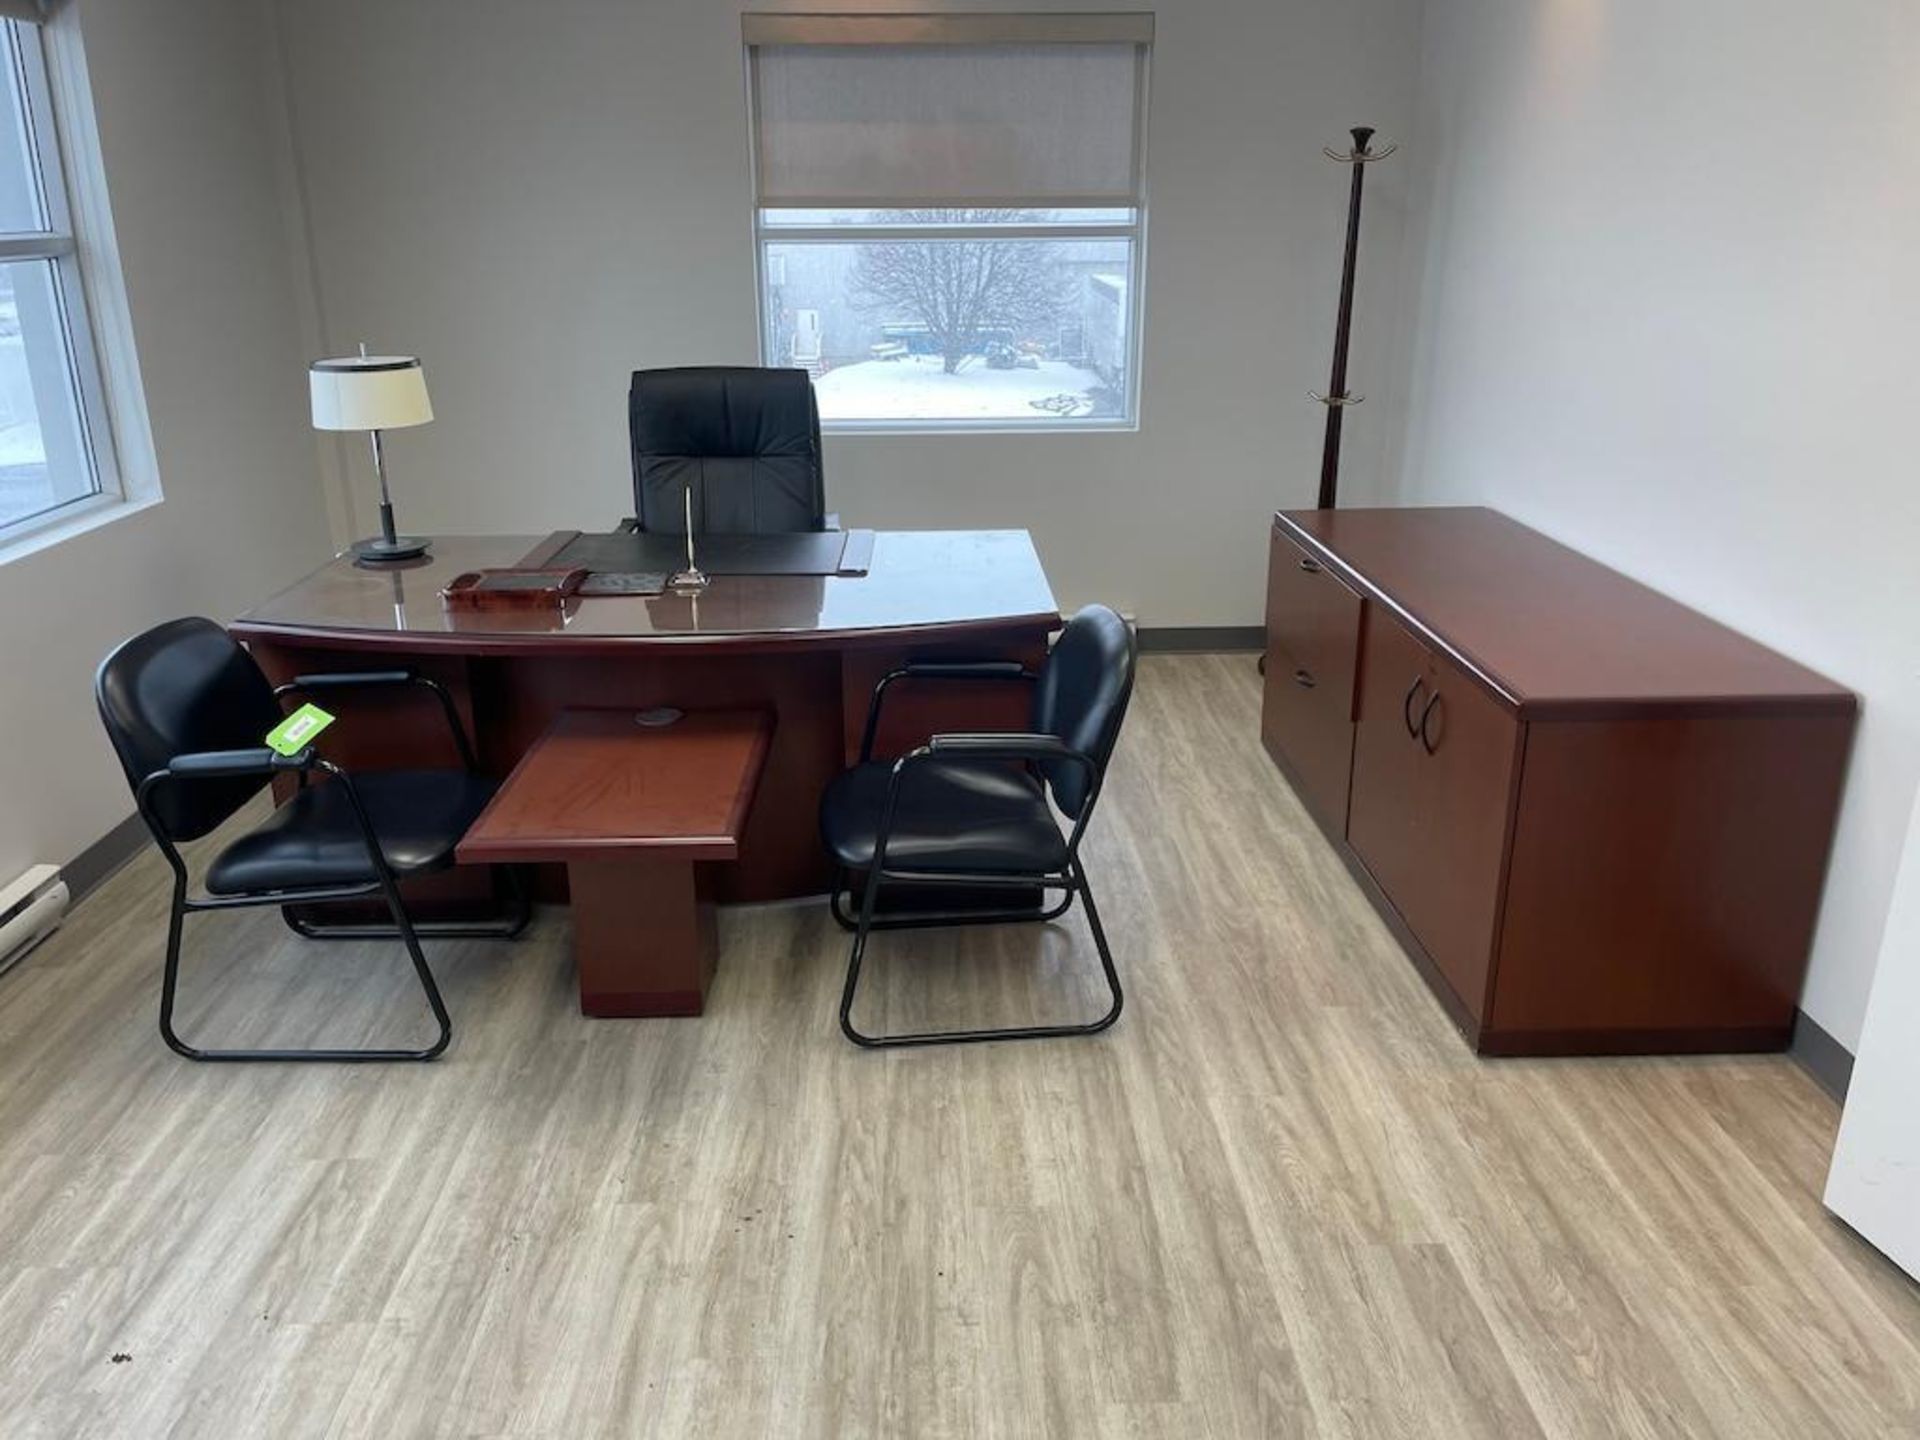 LOT EXECUTIVE OFFICE W DESK, CREDENZA, CHAIRS, SOFA, COFFEE TABLE [TROIS RIVIERES]*PLEASE NOTE, EXCL